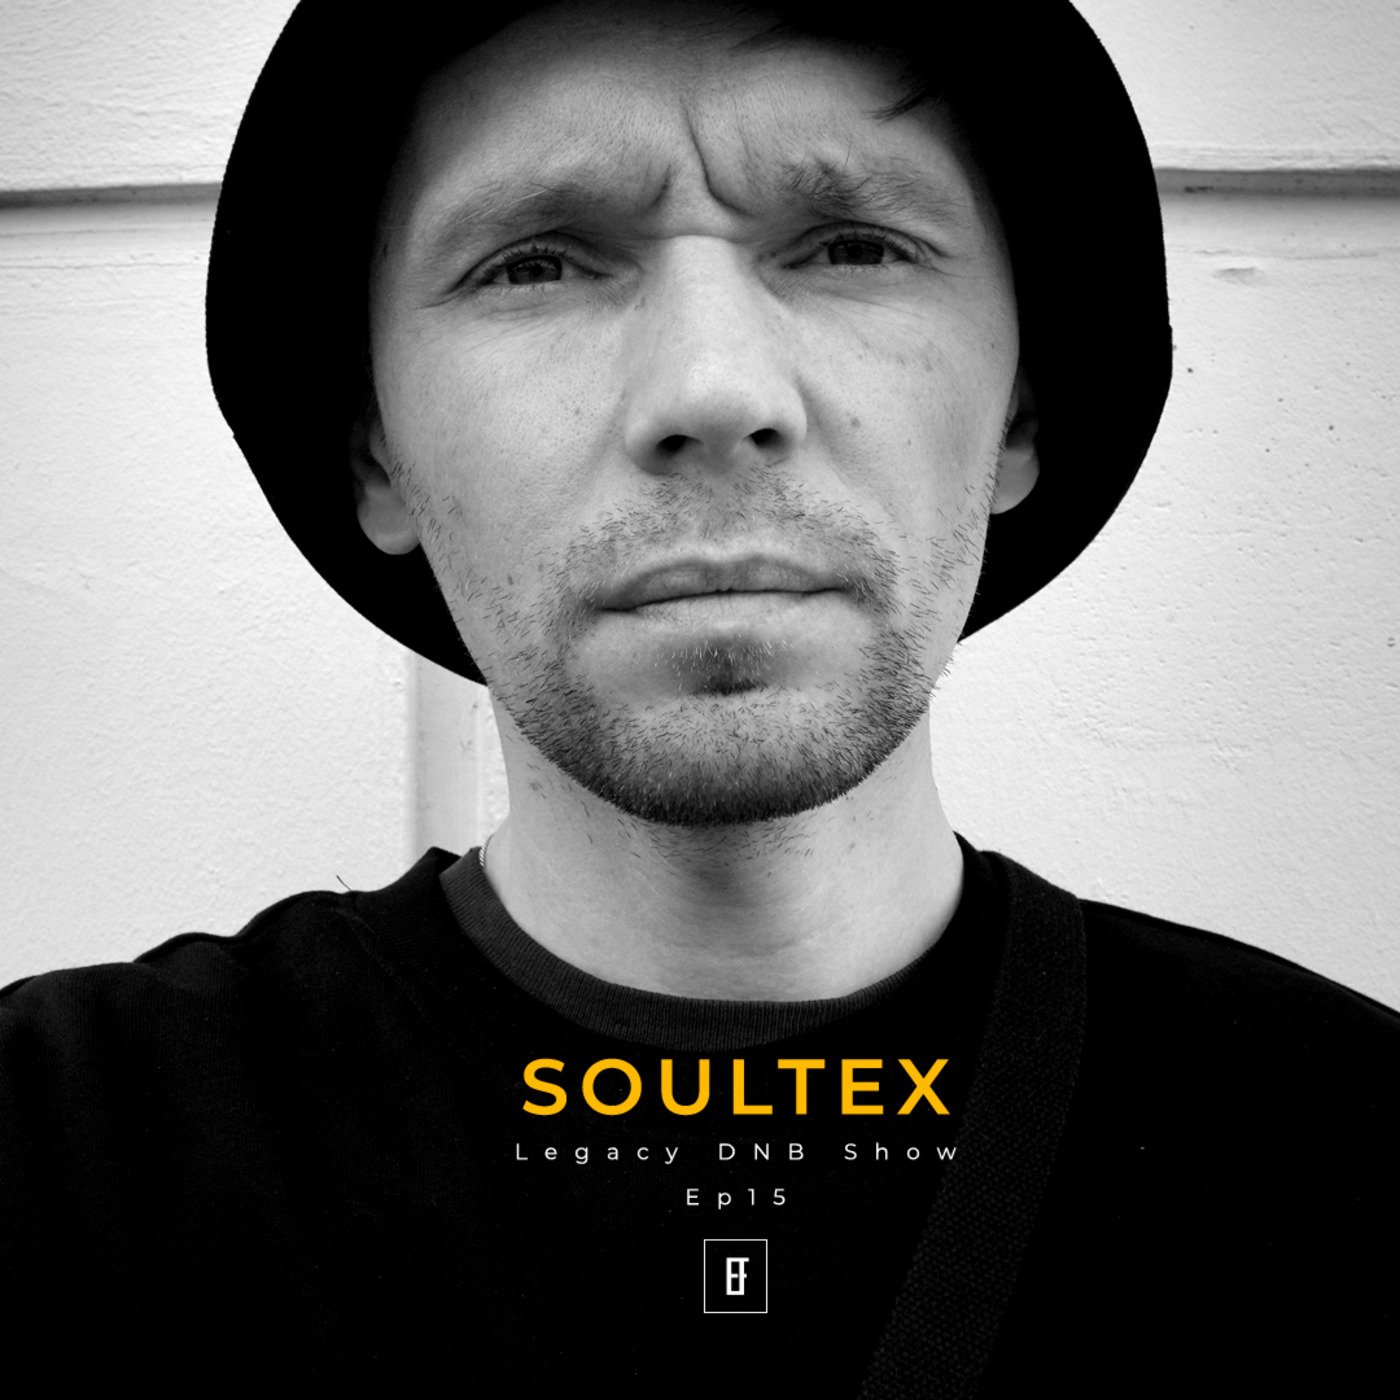 Soultex - Legacy DNB Show Ep15 // East Forms Drum & Bass